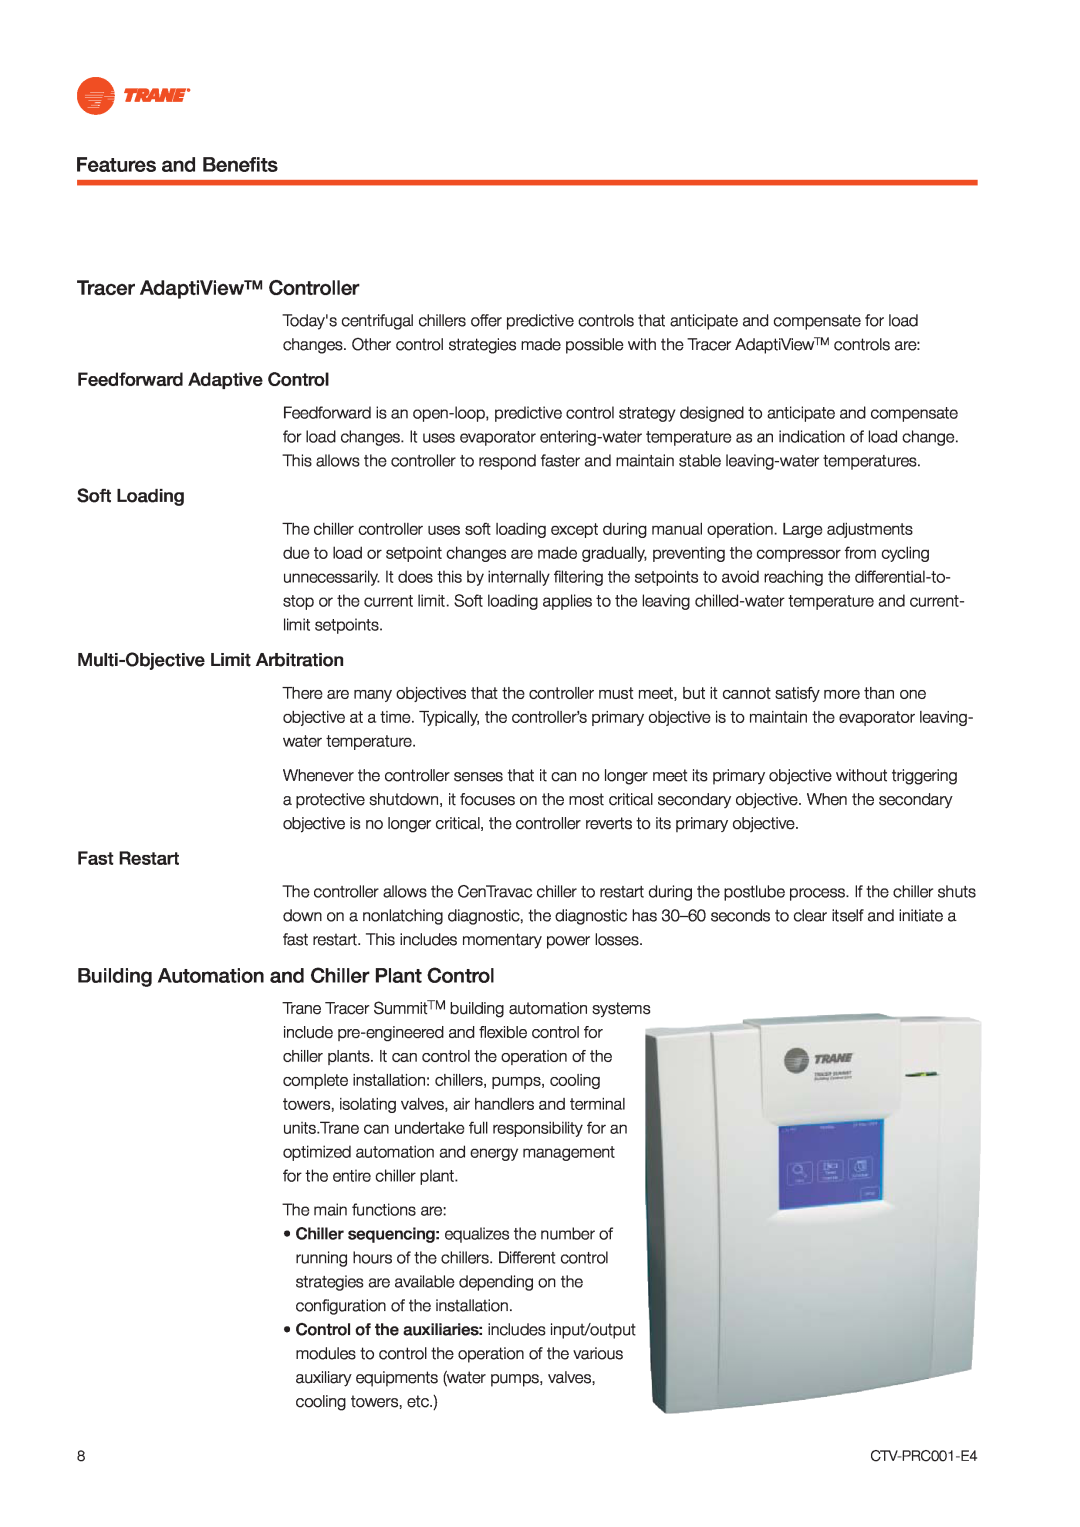 Trane CVGF manual Features and Beneﬁts, Tracer AdaptiViewTM Controller, Building Automation and Chiller Plant Control 